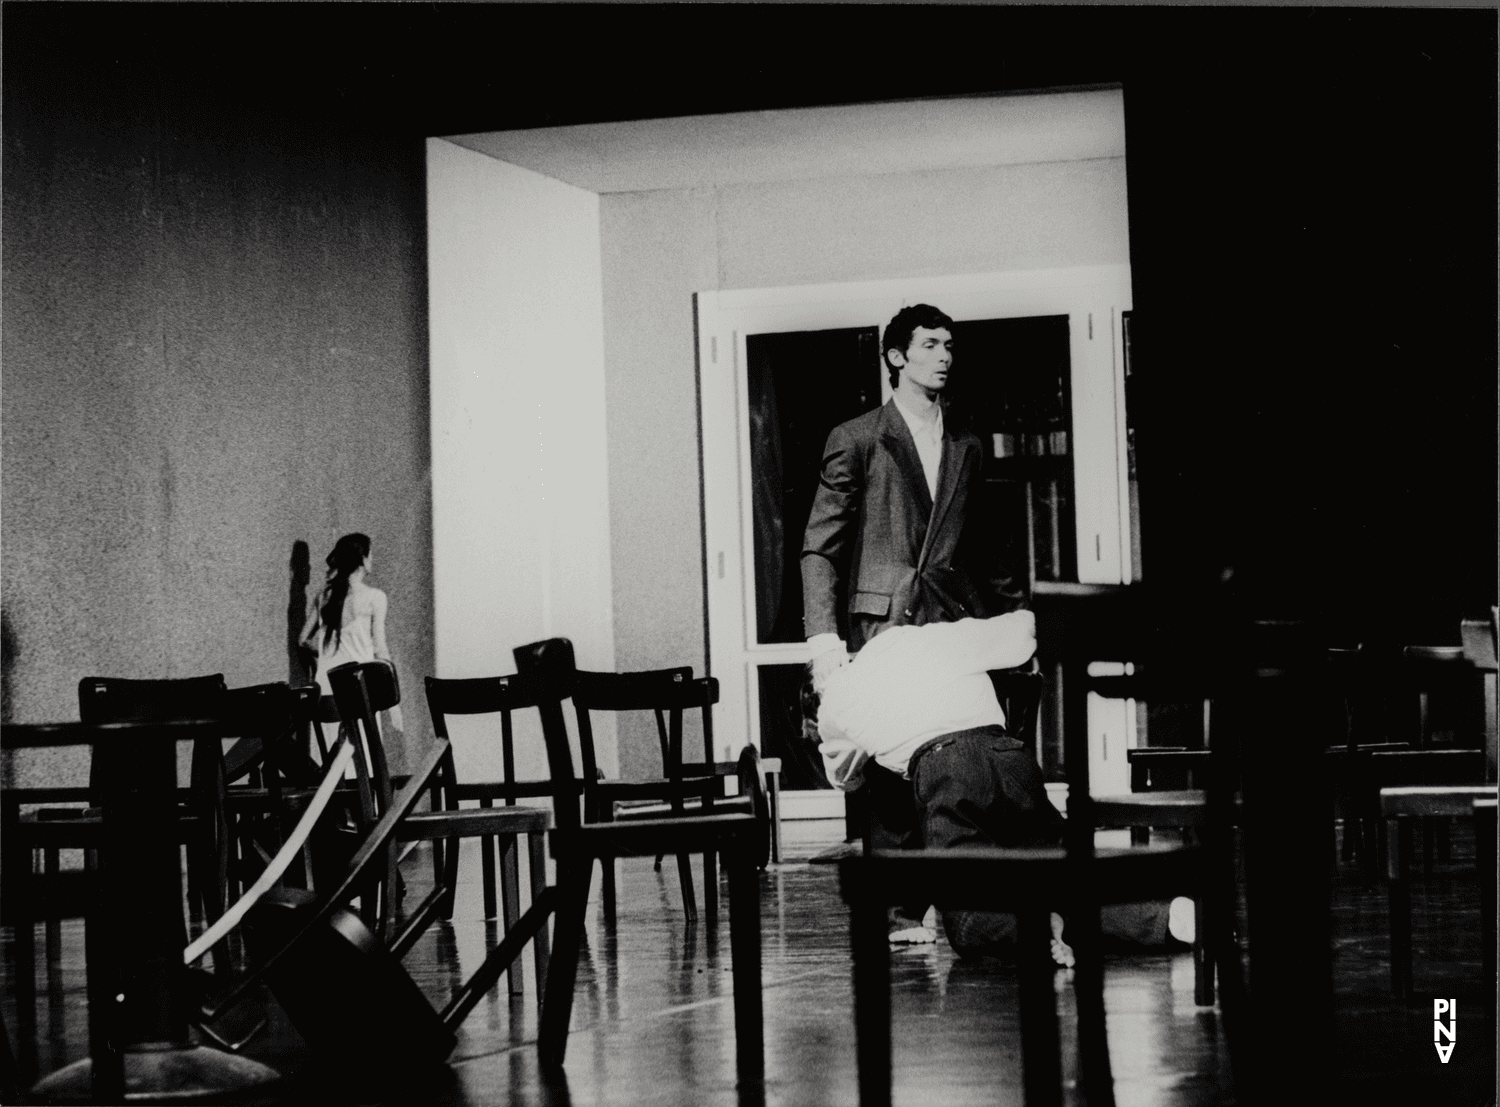 Dominique Mercy, Fabien Prioville and Pina Bausch in “Café Müller” by Pina Bausch